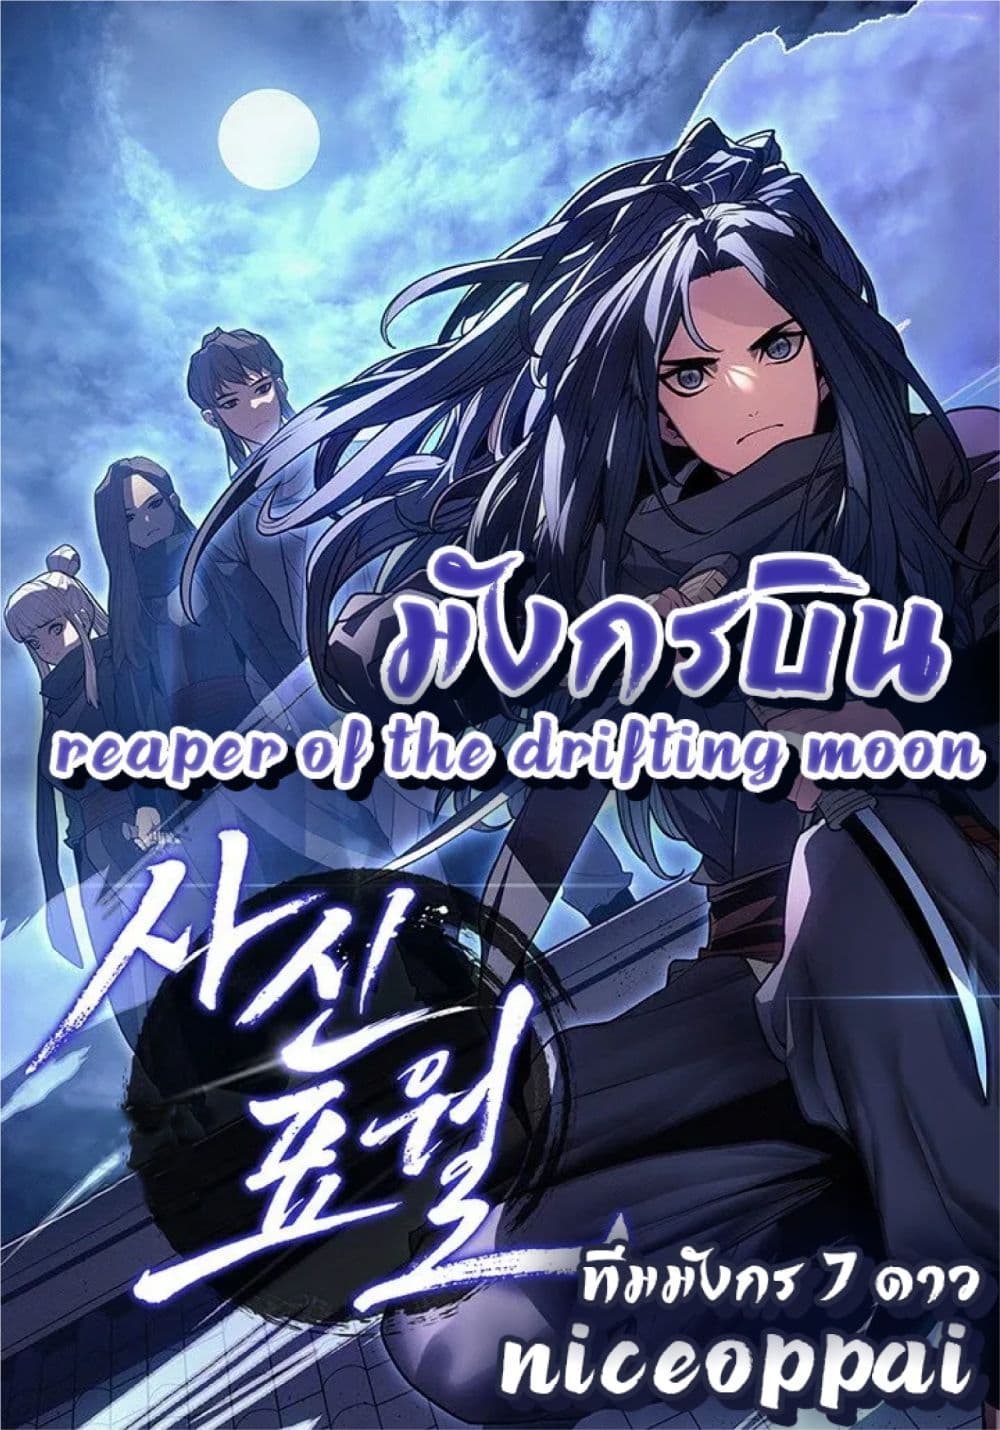 Reaper of the Drifting Moon 6-6